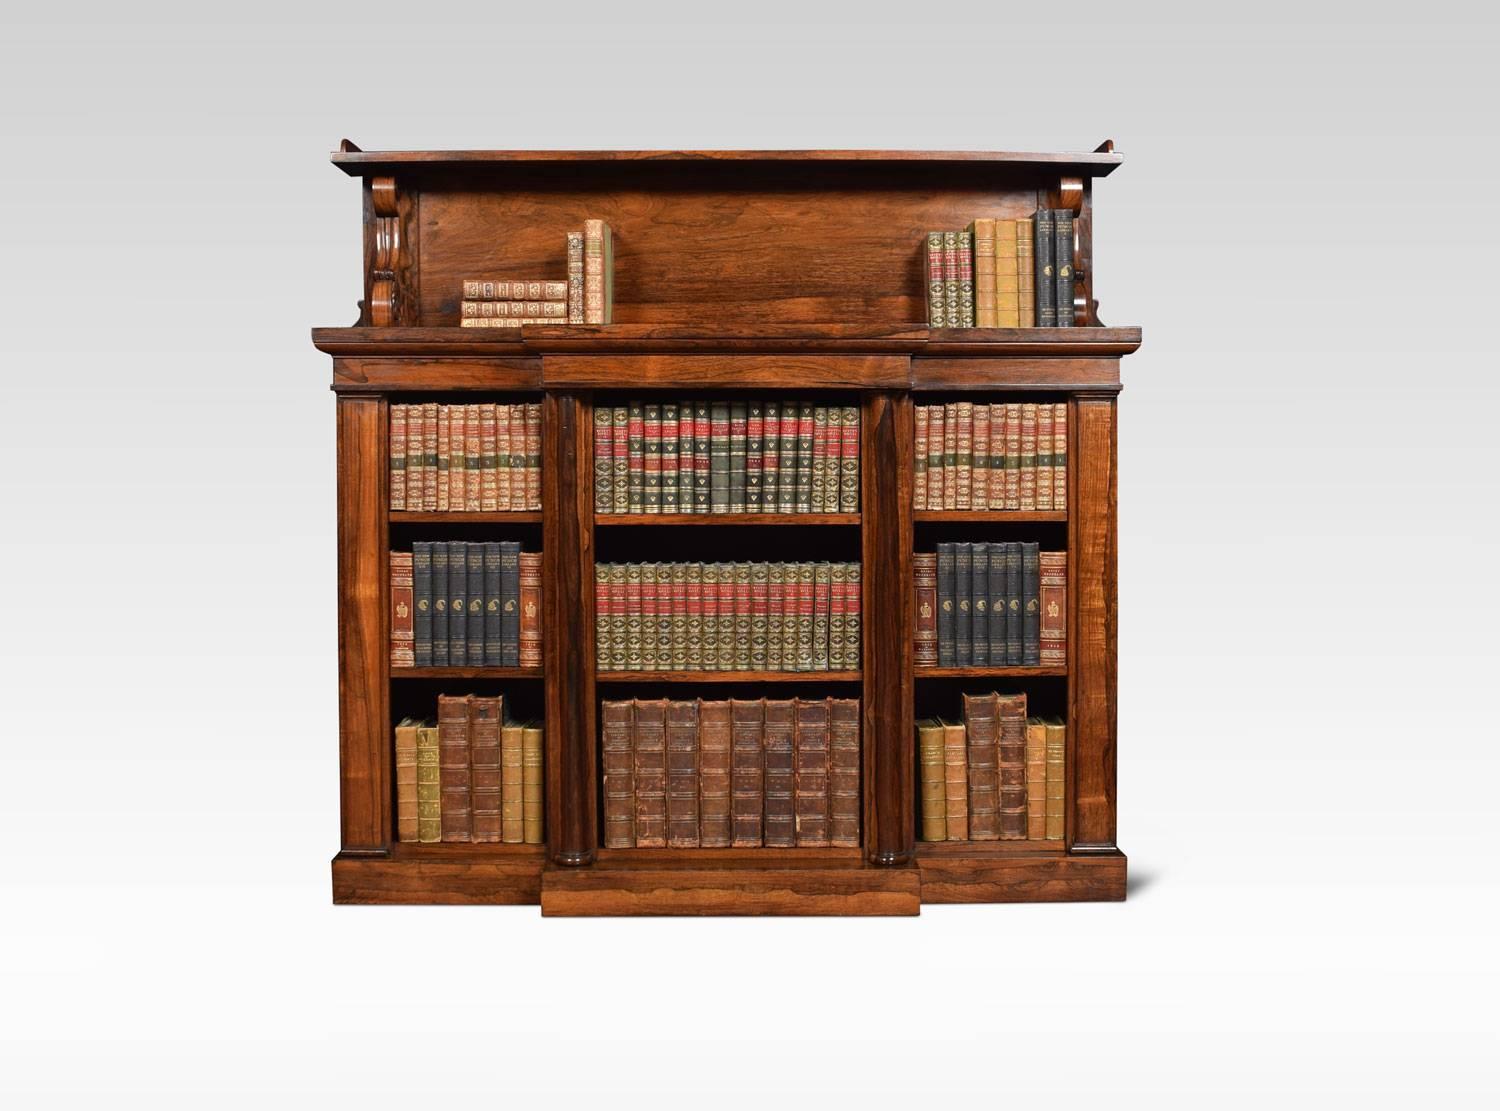 Regency rosewood bookcase the raised gallery supported on scroll supports, to the large breakfront top with moulded edge. Above three bays of adjustable shelves. All raised up on plinth base.

John Kendall was a cabinet maker from Leeds, Yorkshire